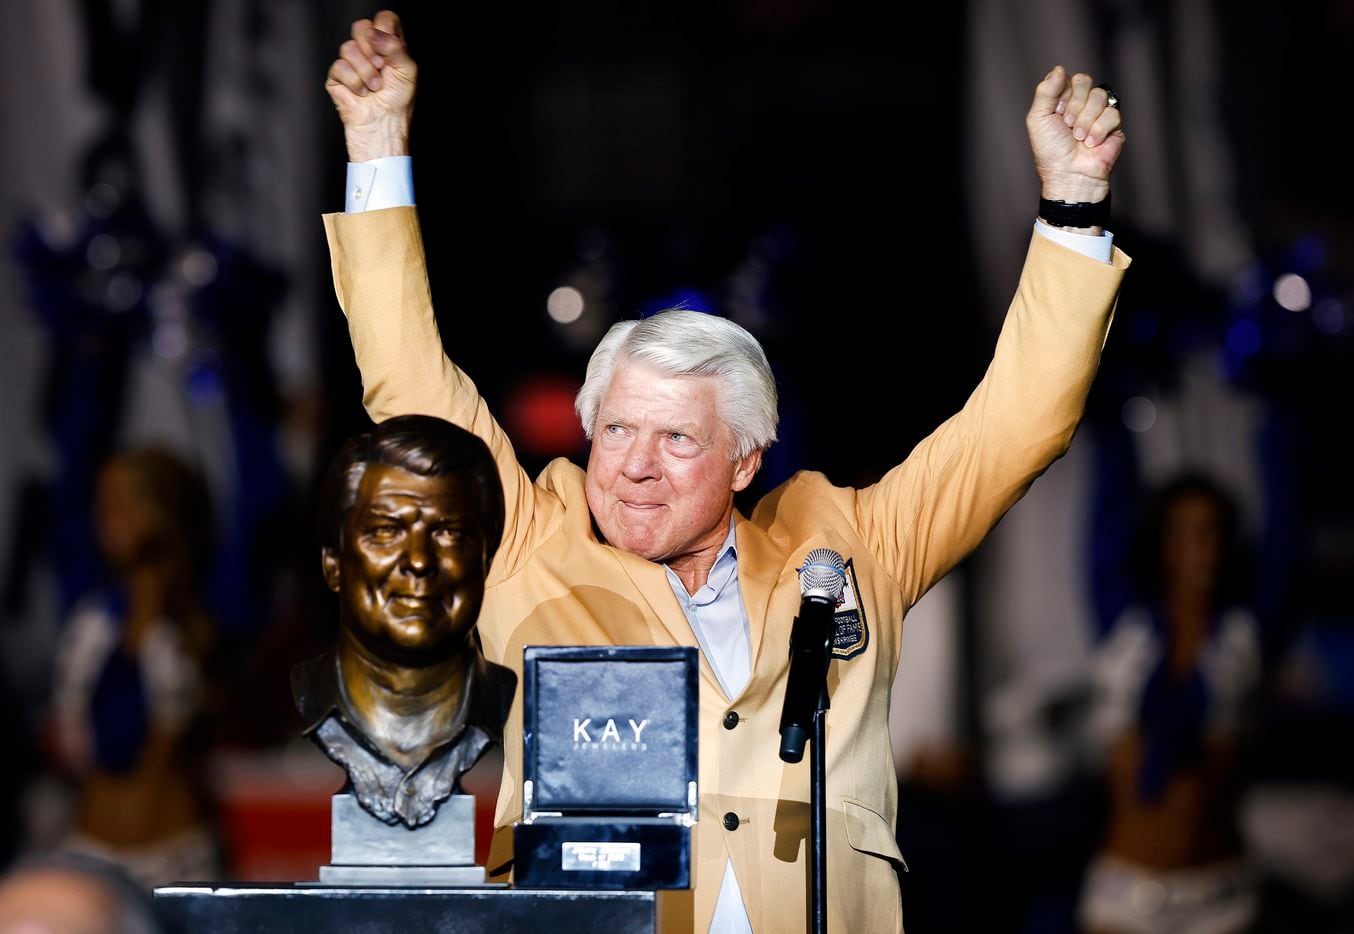 Former Dallas Cowboys head coach and Pro Football Hall of Famer Jimmy Johnson raises his arms after yelling "How 'bout them Cowboys!" during his Hall ring ceremony speech at AT&T Stadium in Arlington, Monday, September 27, 2021. (Tom Fox/The Dallas Morning News)